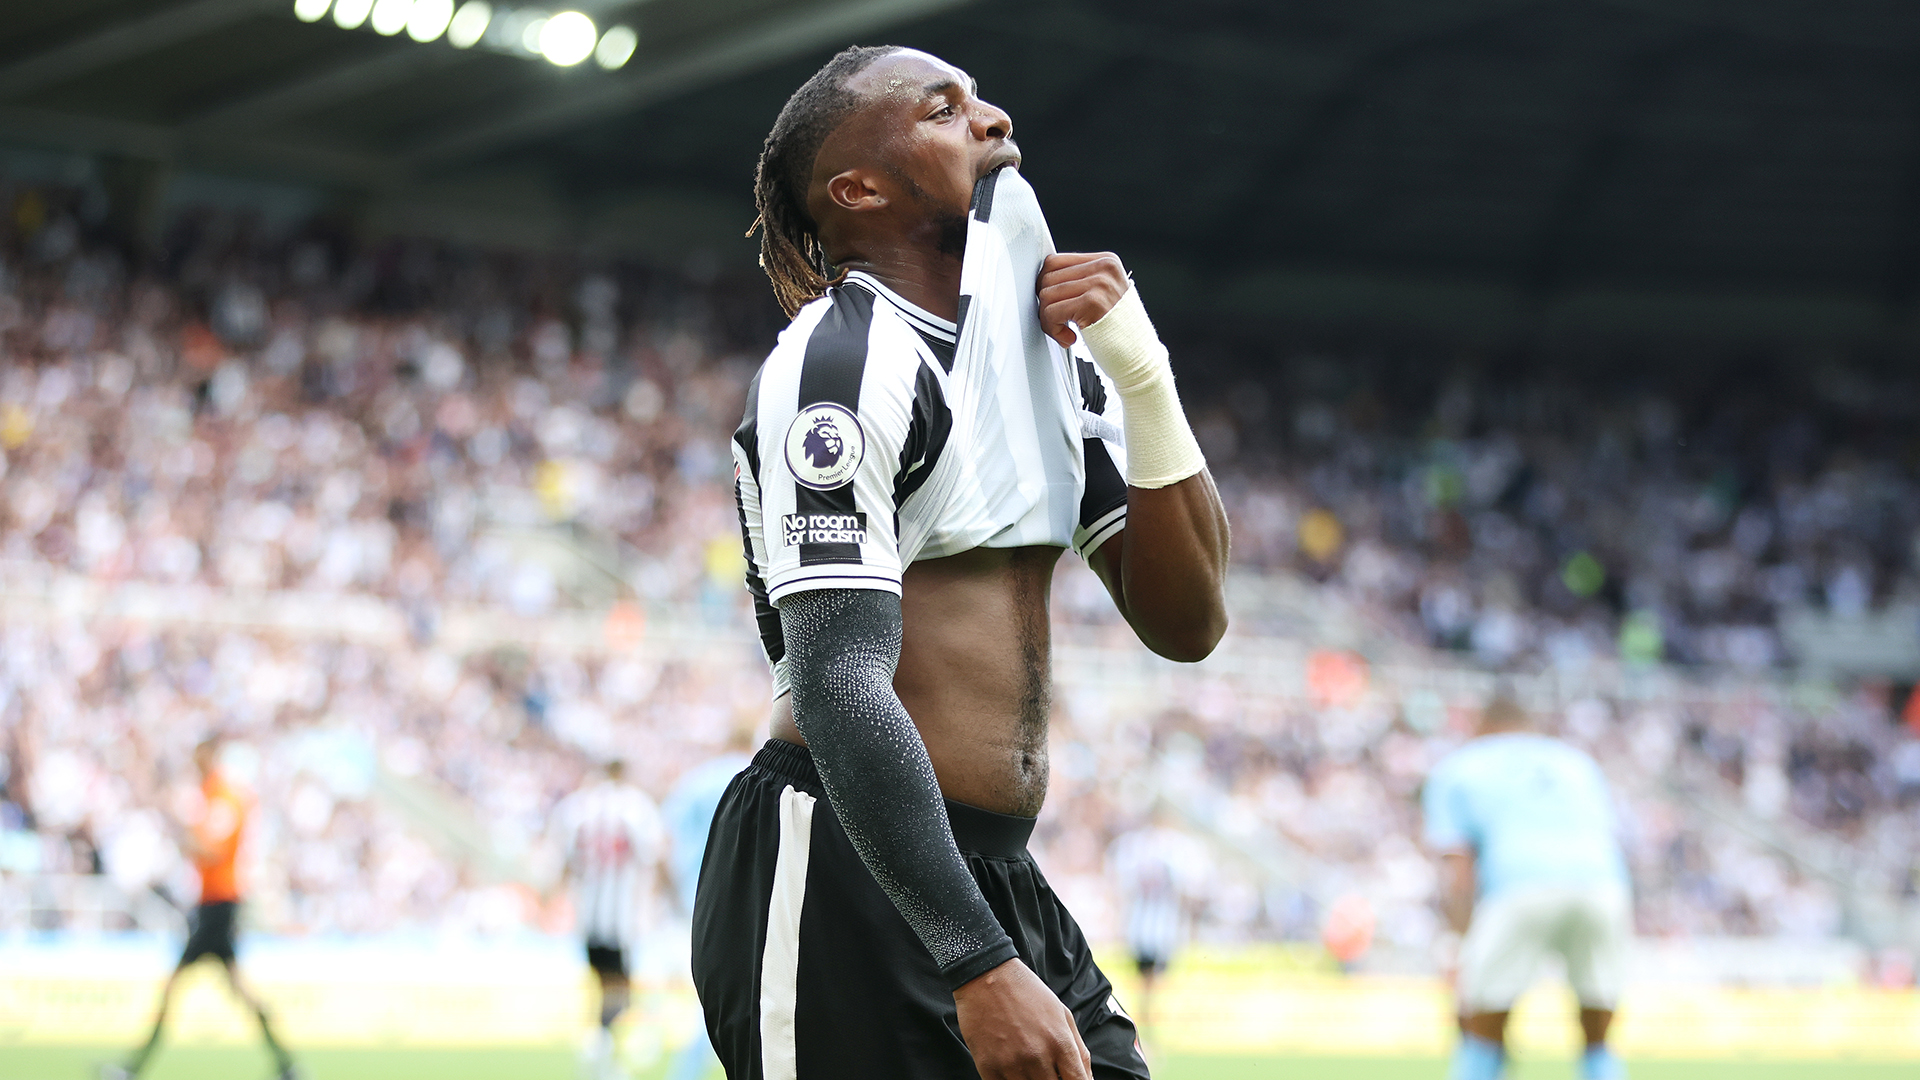 Allan Saint-Maximin of Newcastle United reacts after a missed sho during the Premier League match between Newcastle United and Manchester City at St. James Park on August 21, 2022 in Newcastle upon Tyne, England.